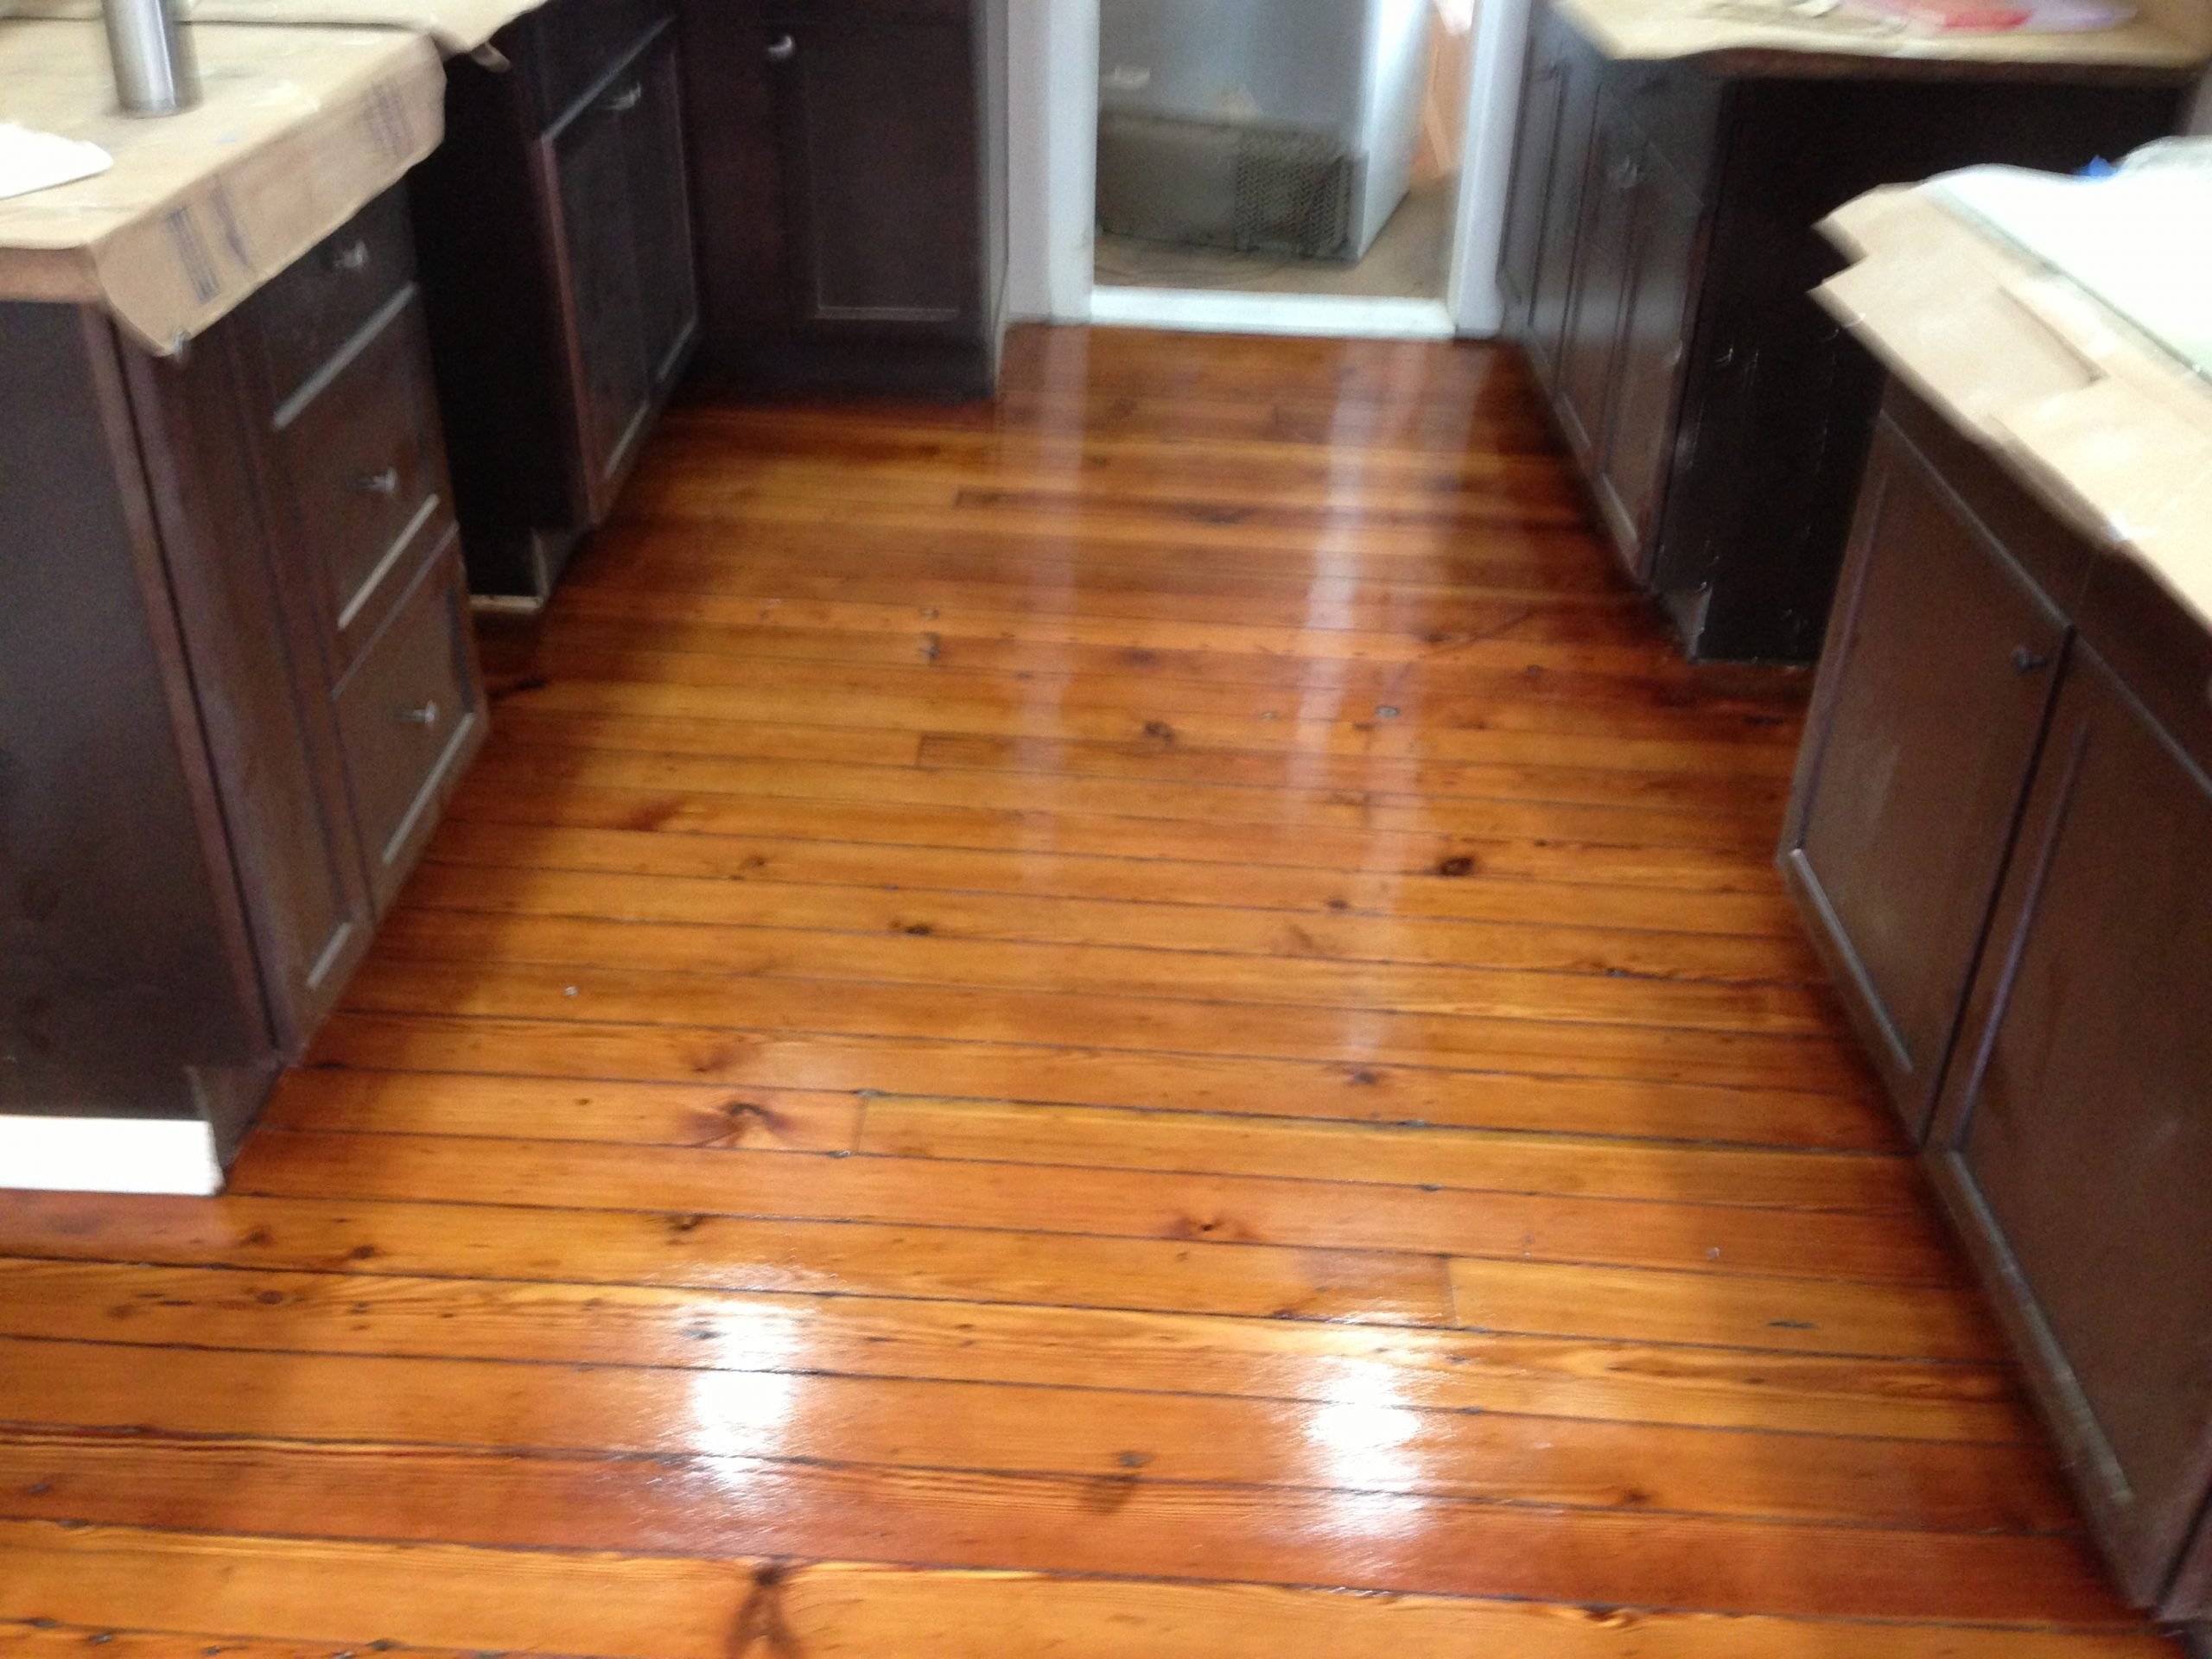 Can You Use Pine Sol On Laminate Floors : Multi Purpose Household ...